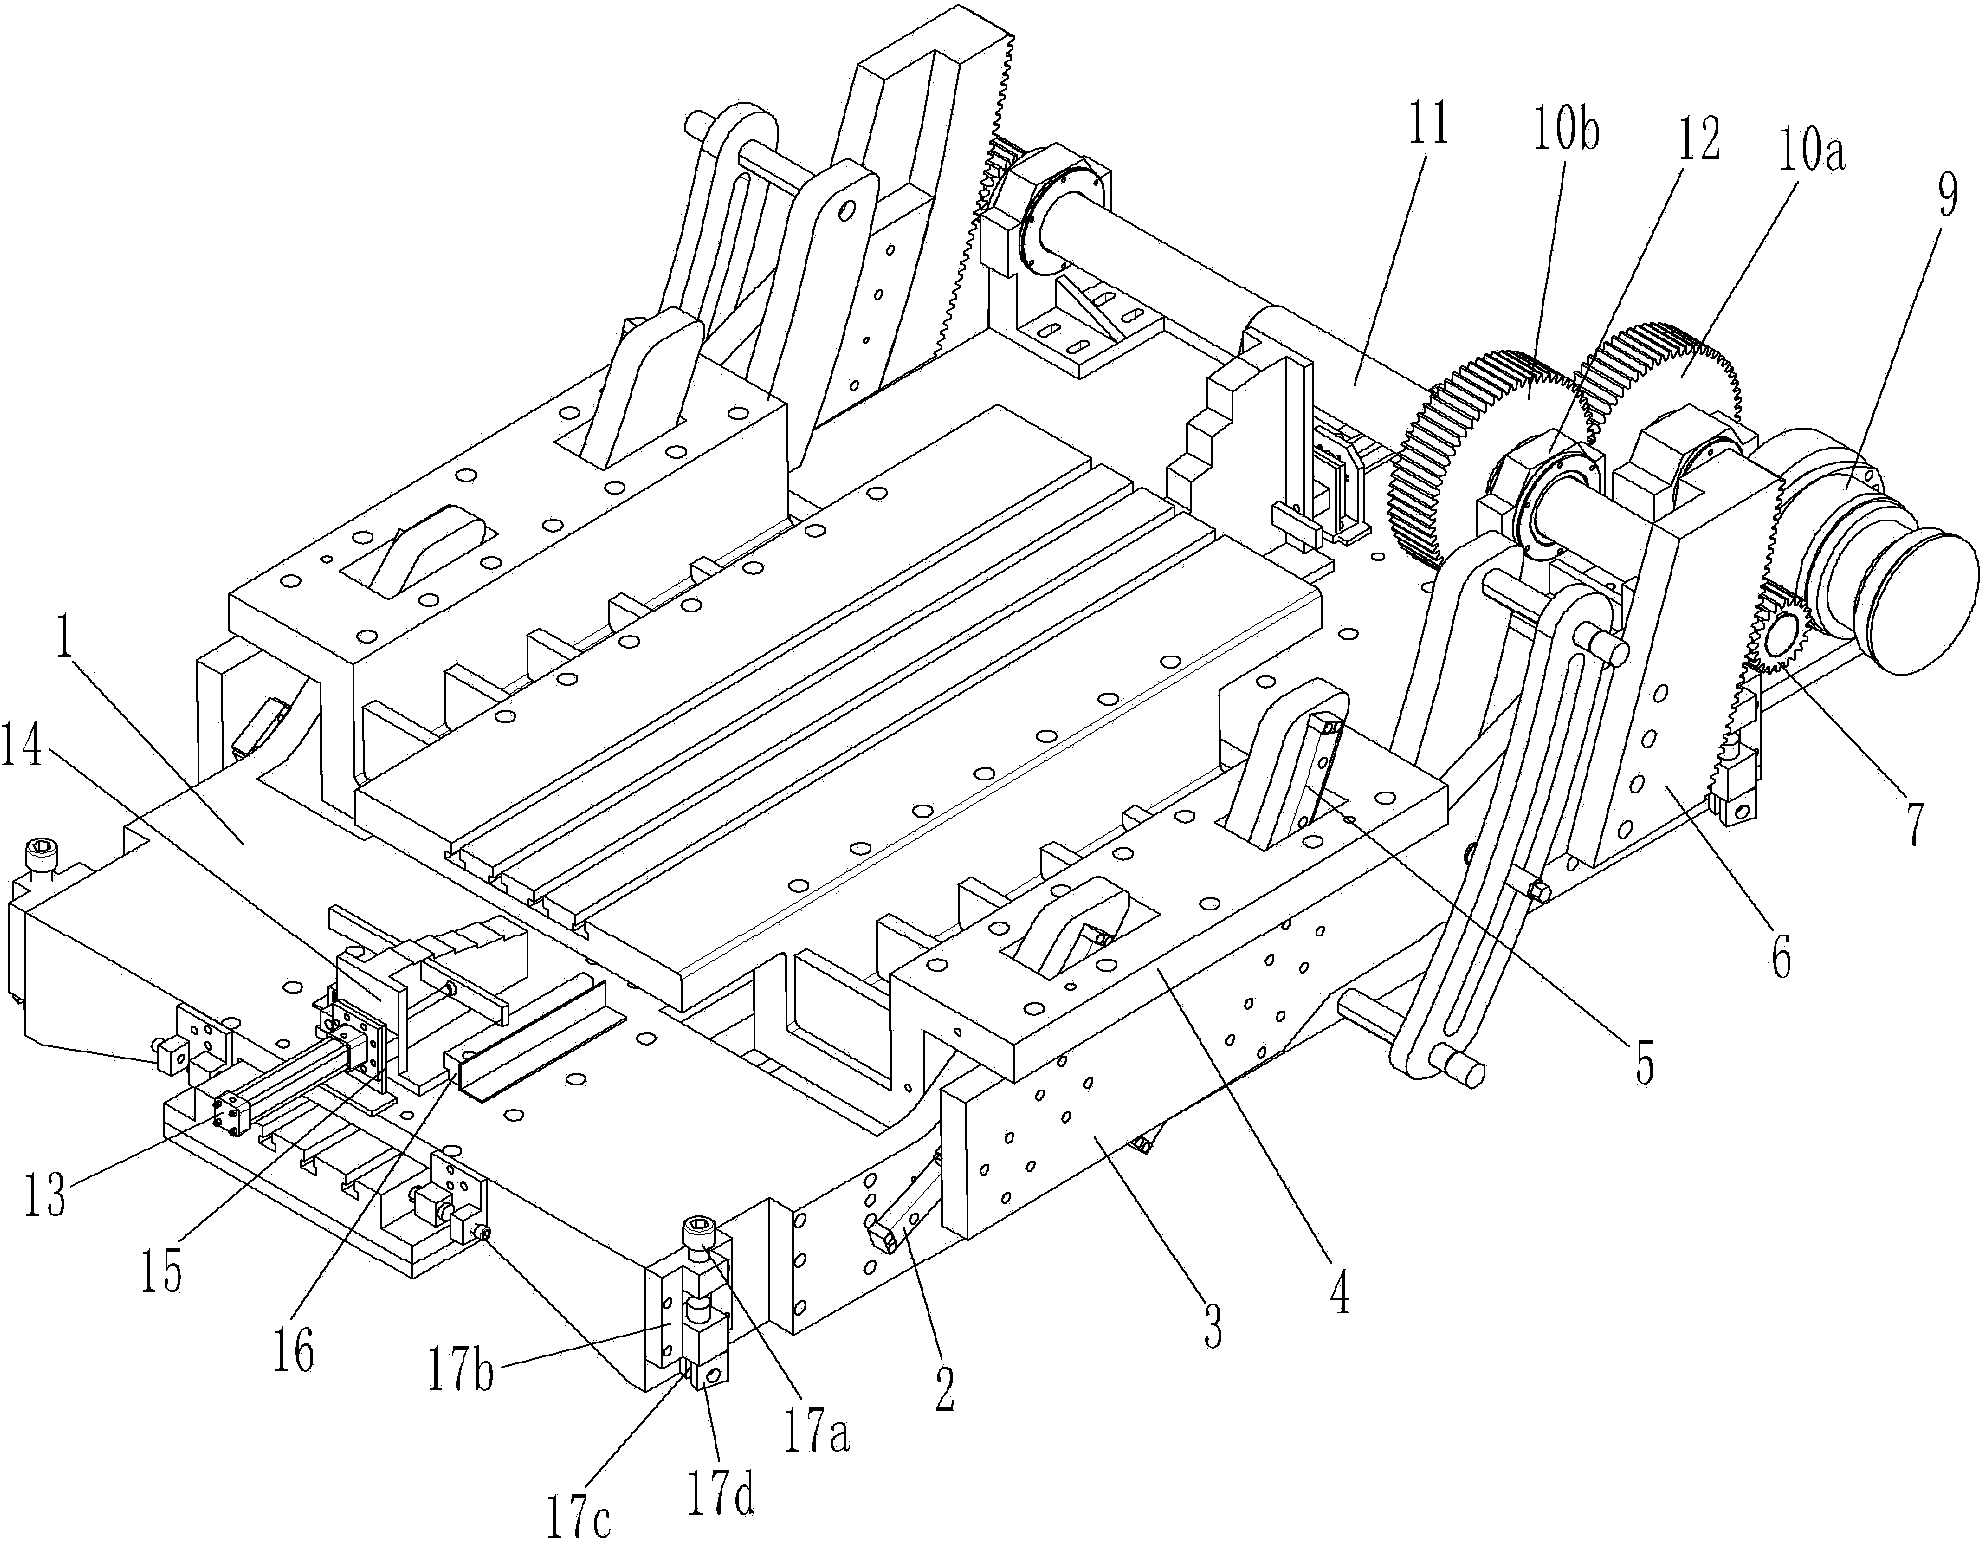 Variable attack angel apparatus for wind tunnel test of aircraft engine model